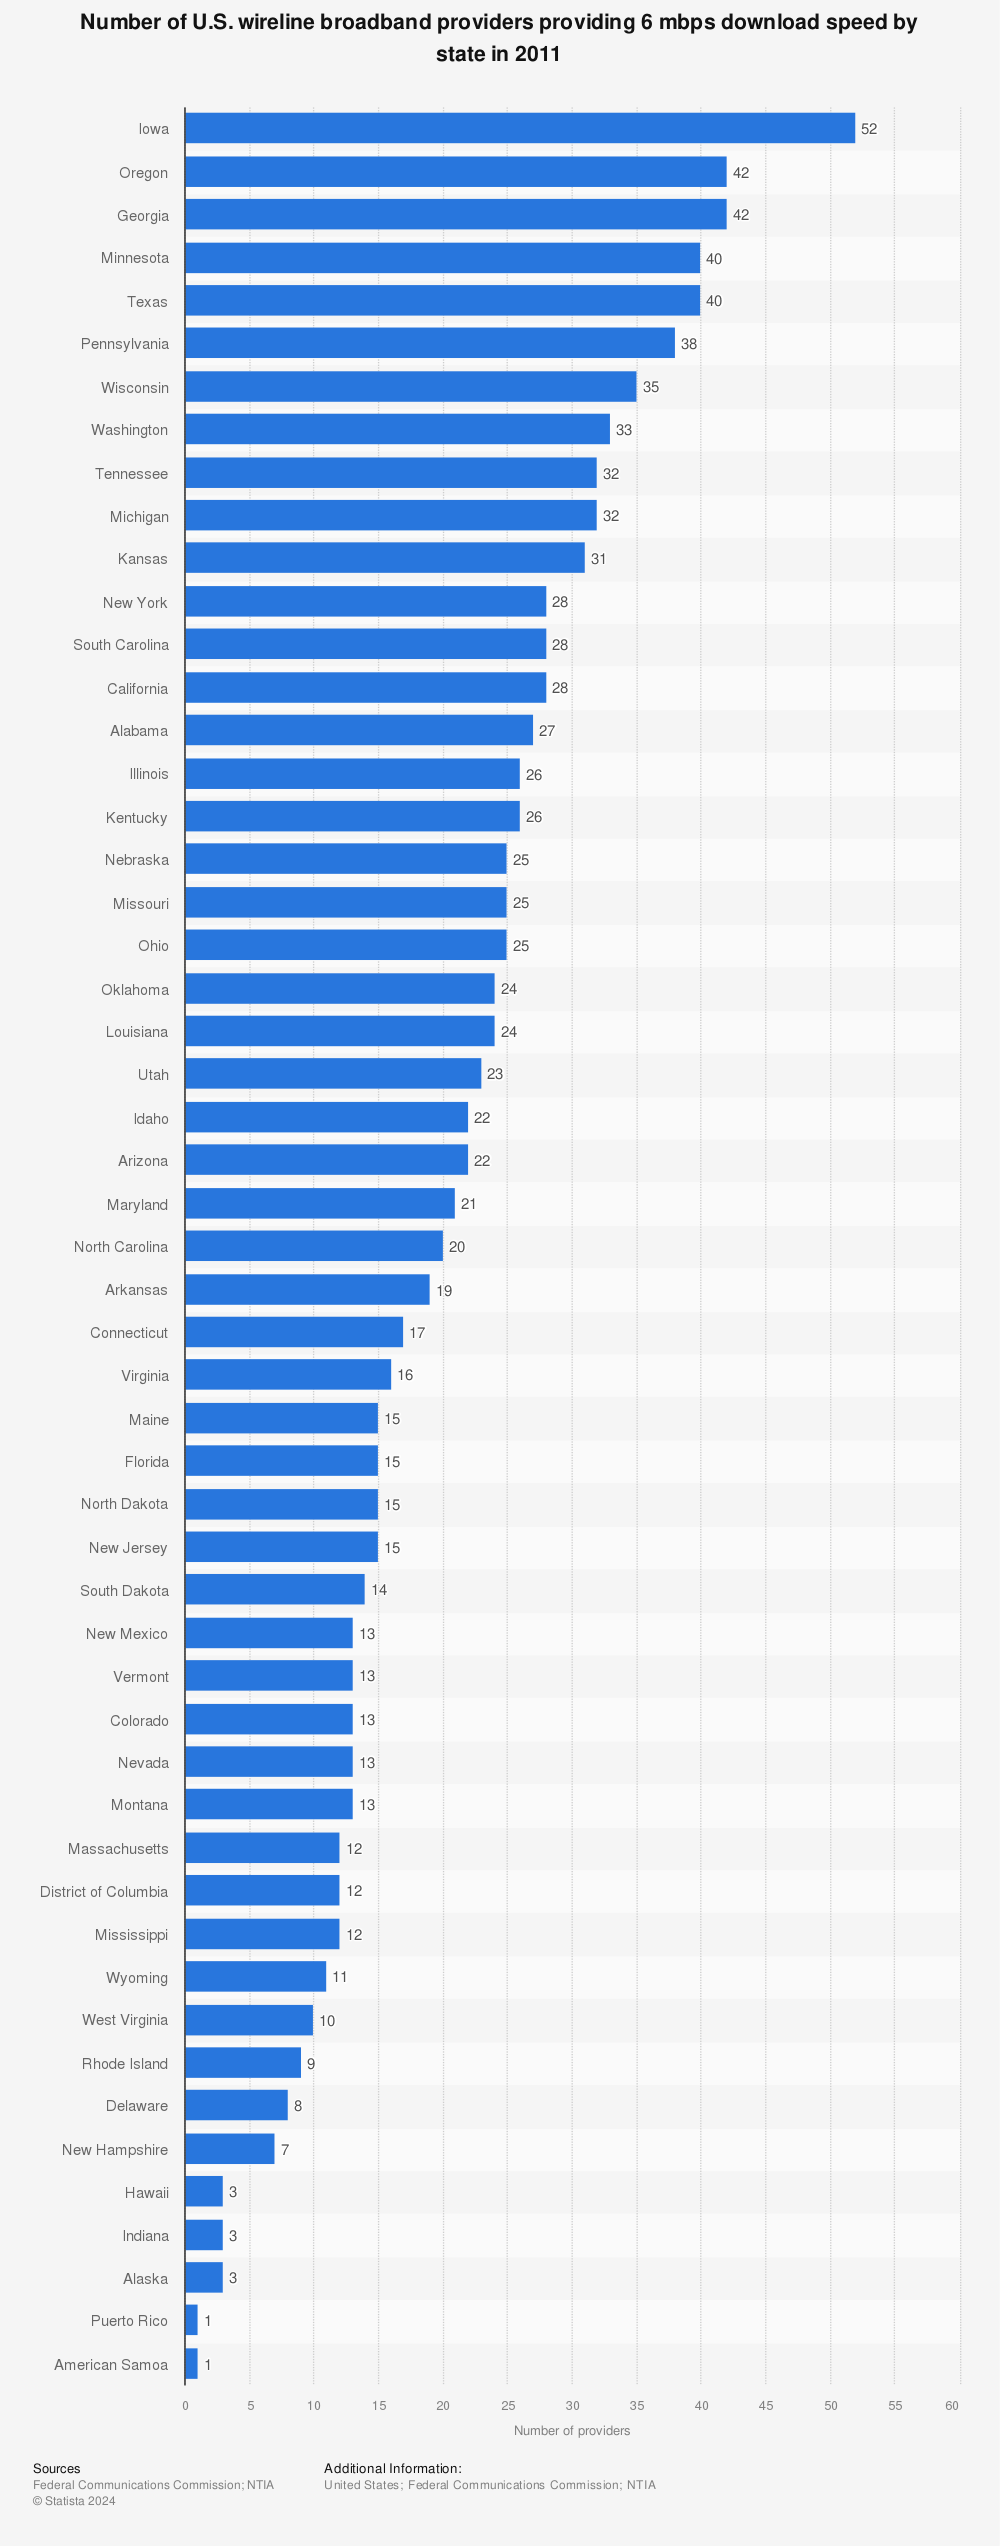 Statistic: Number of U.S. wireline broadband providers providing 6 mbps download speed by state in 2011 | Statista